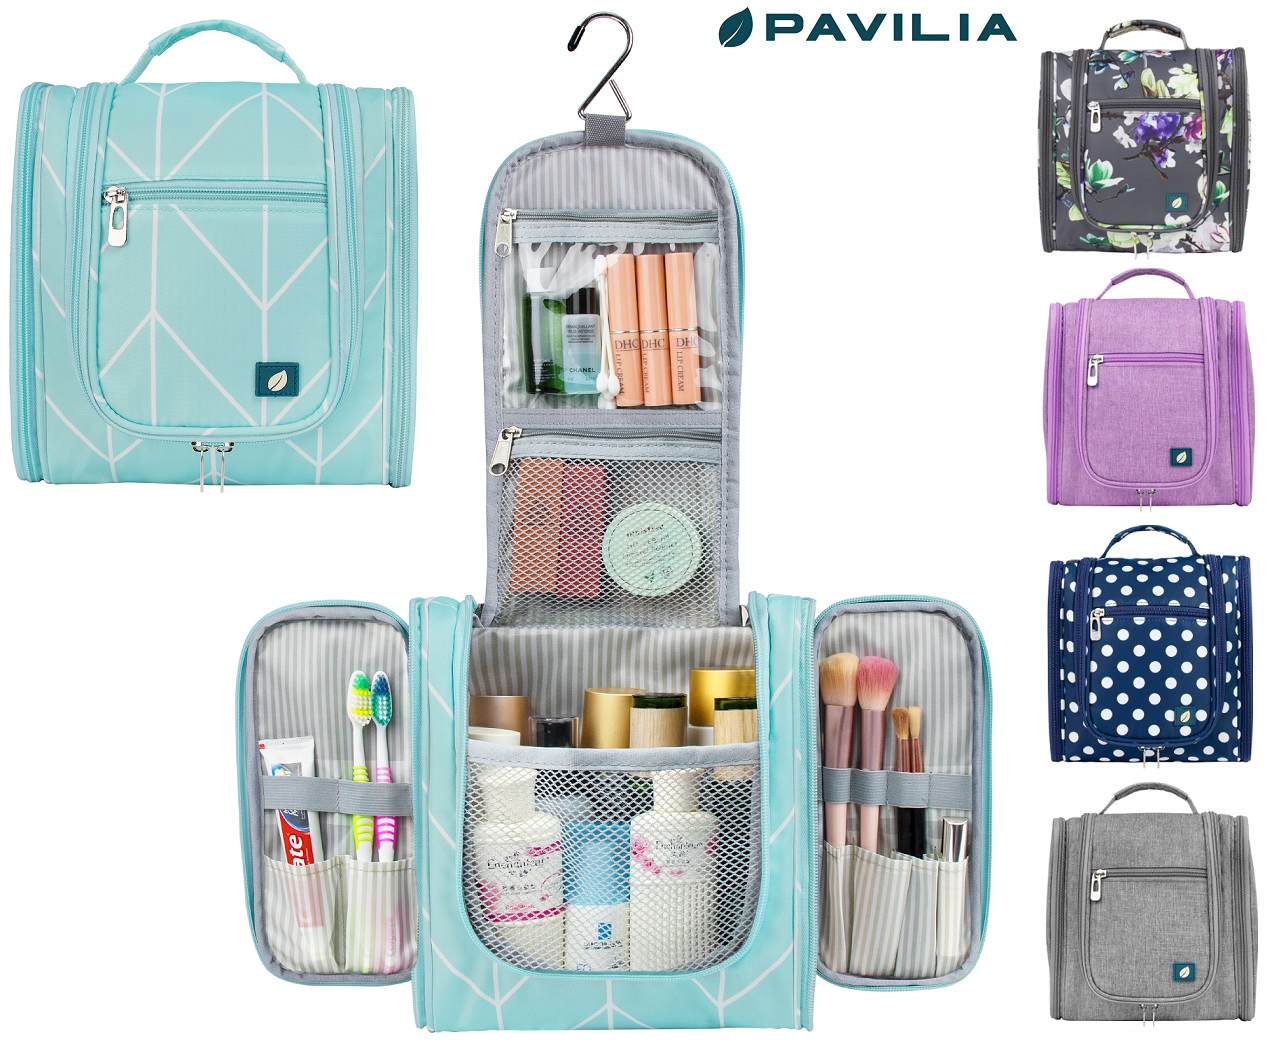 PAVILIA Hanging Toiletry Bag for Women Men, Travel Toiletry Bag Organizer for Toiletries, Cosmetics, Makeup Bag with Mesh, Water Resistant Pockets (